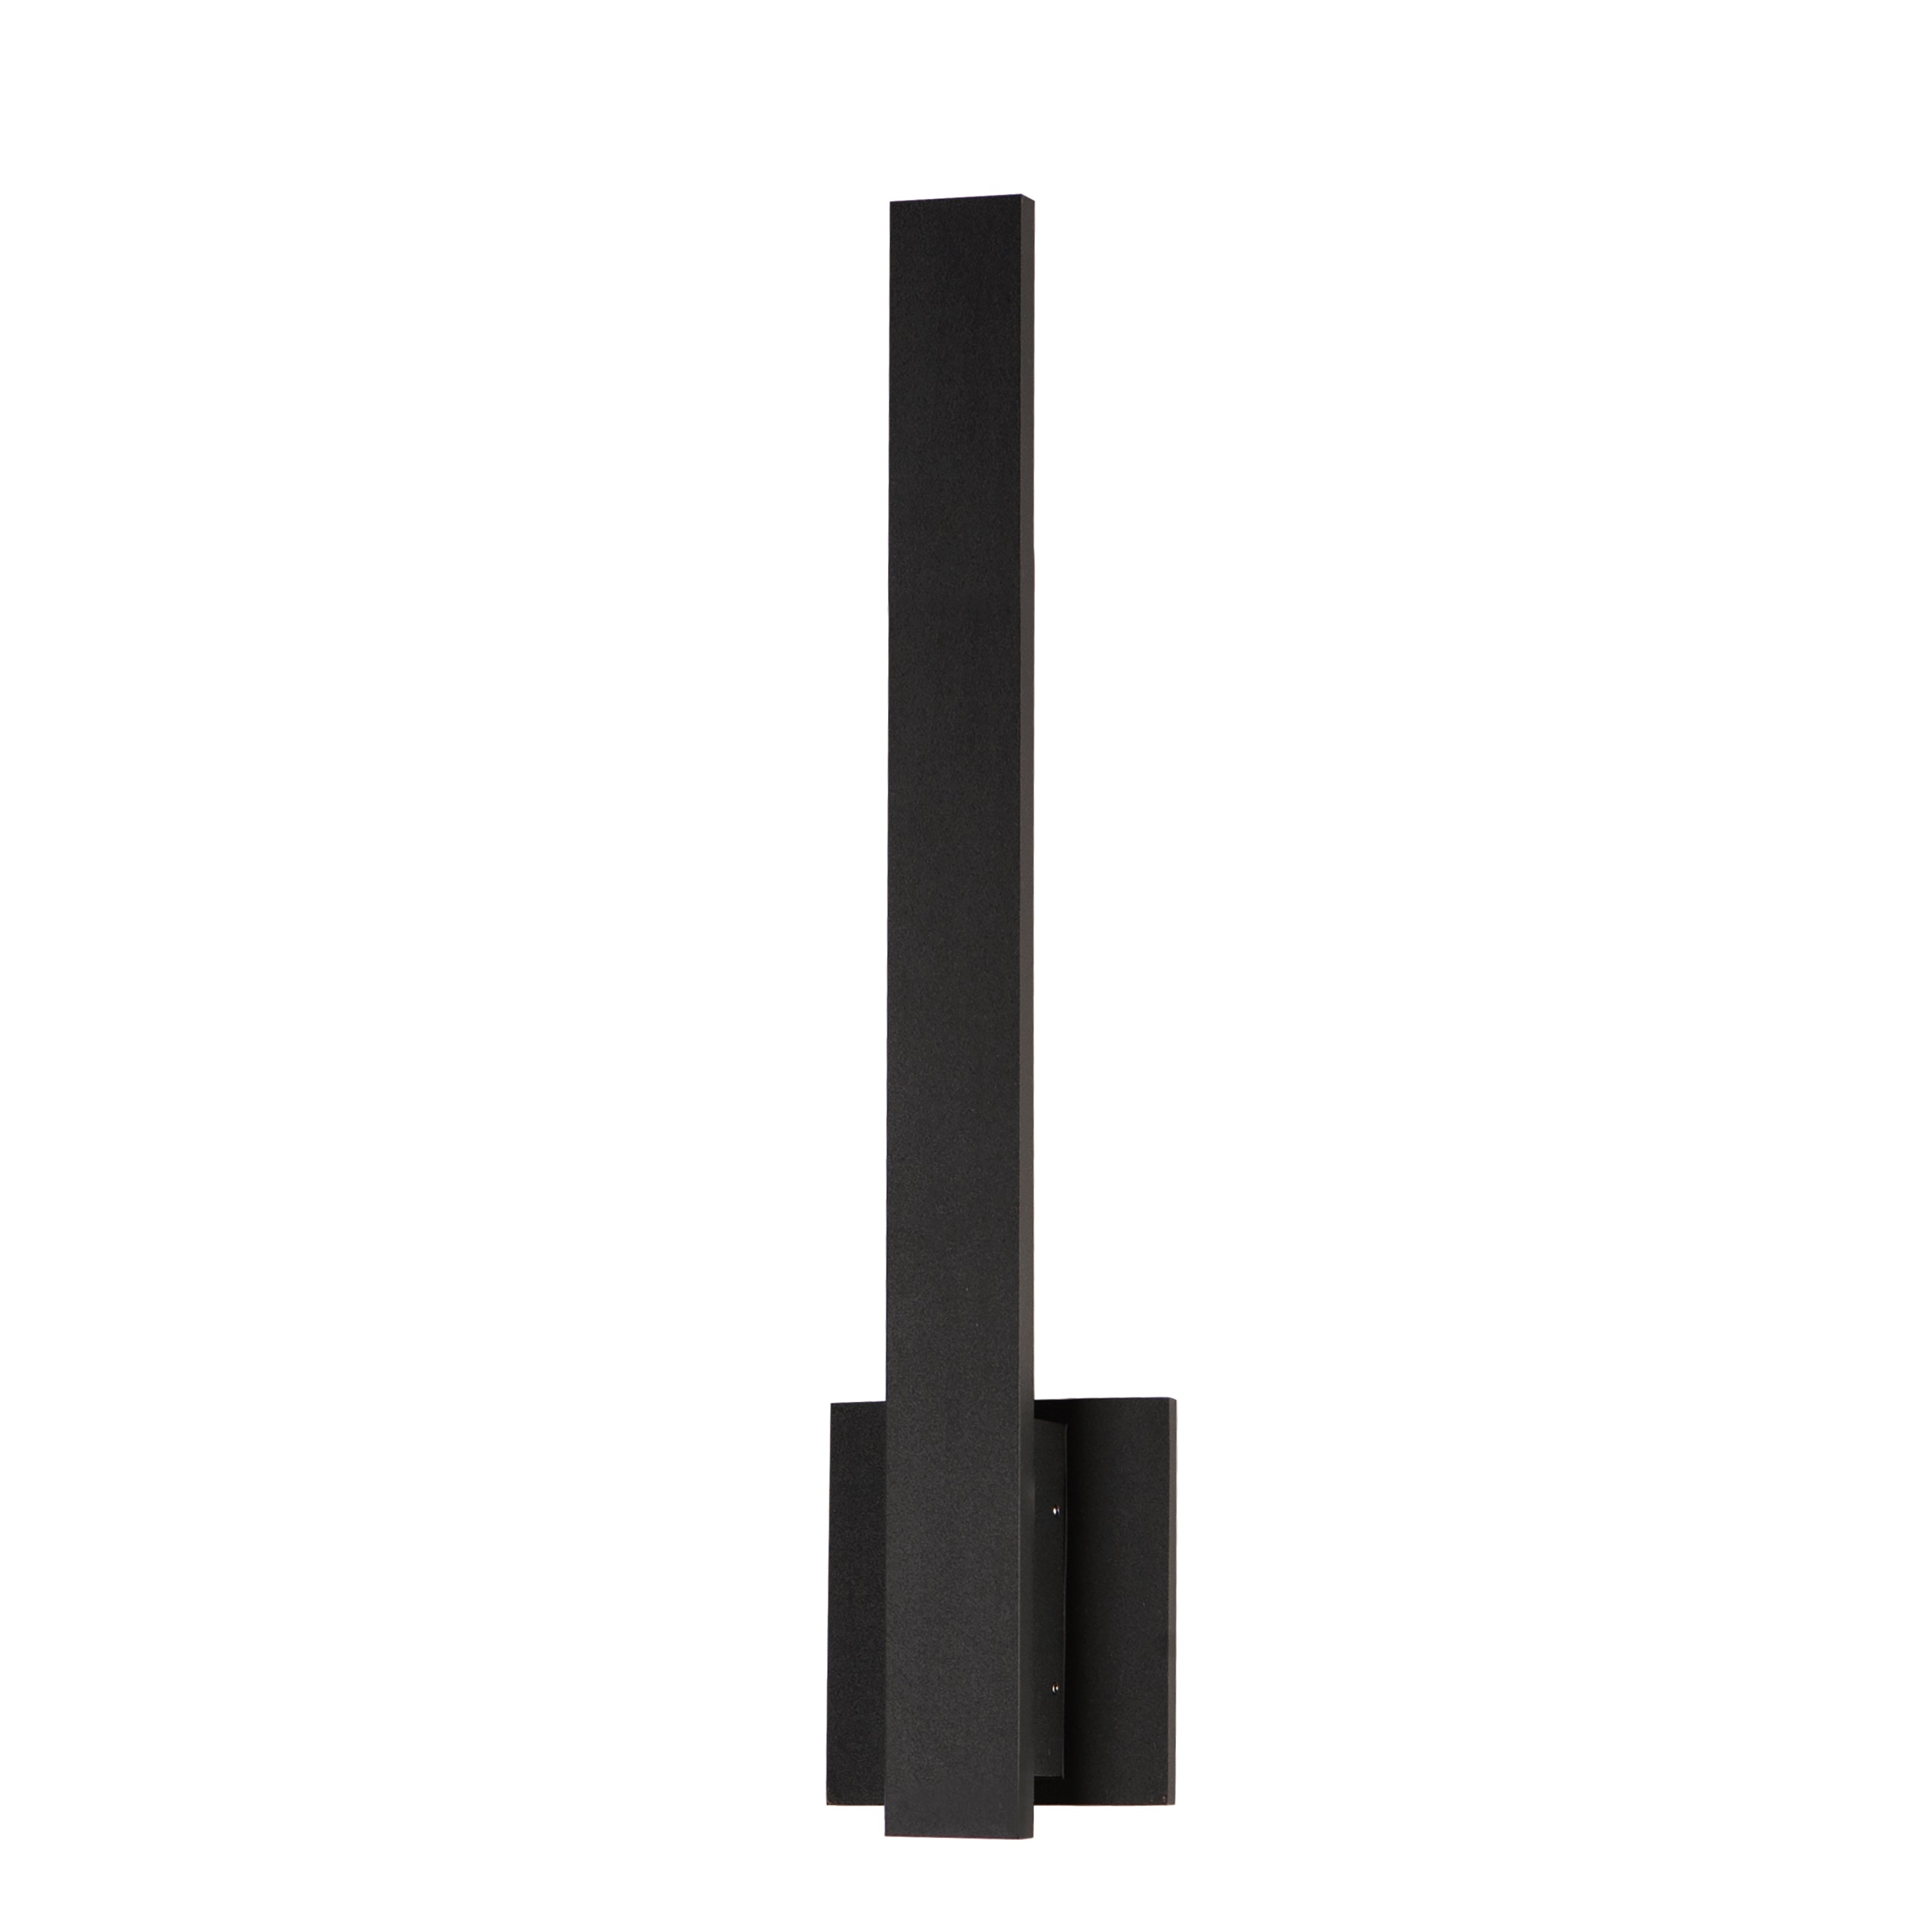 ALUMI LUX LINE Outdoor wall sconce Black INTEGRATED LED - E41342-BK | MAXIM/ET3